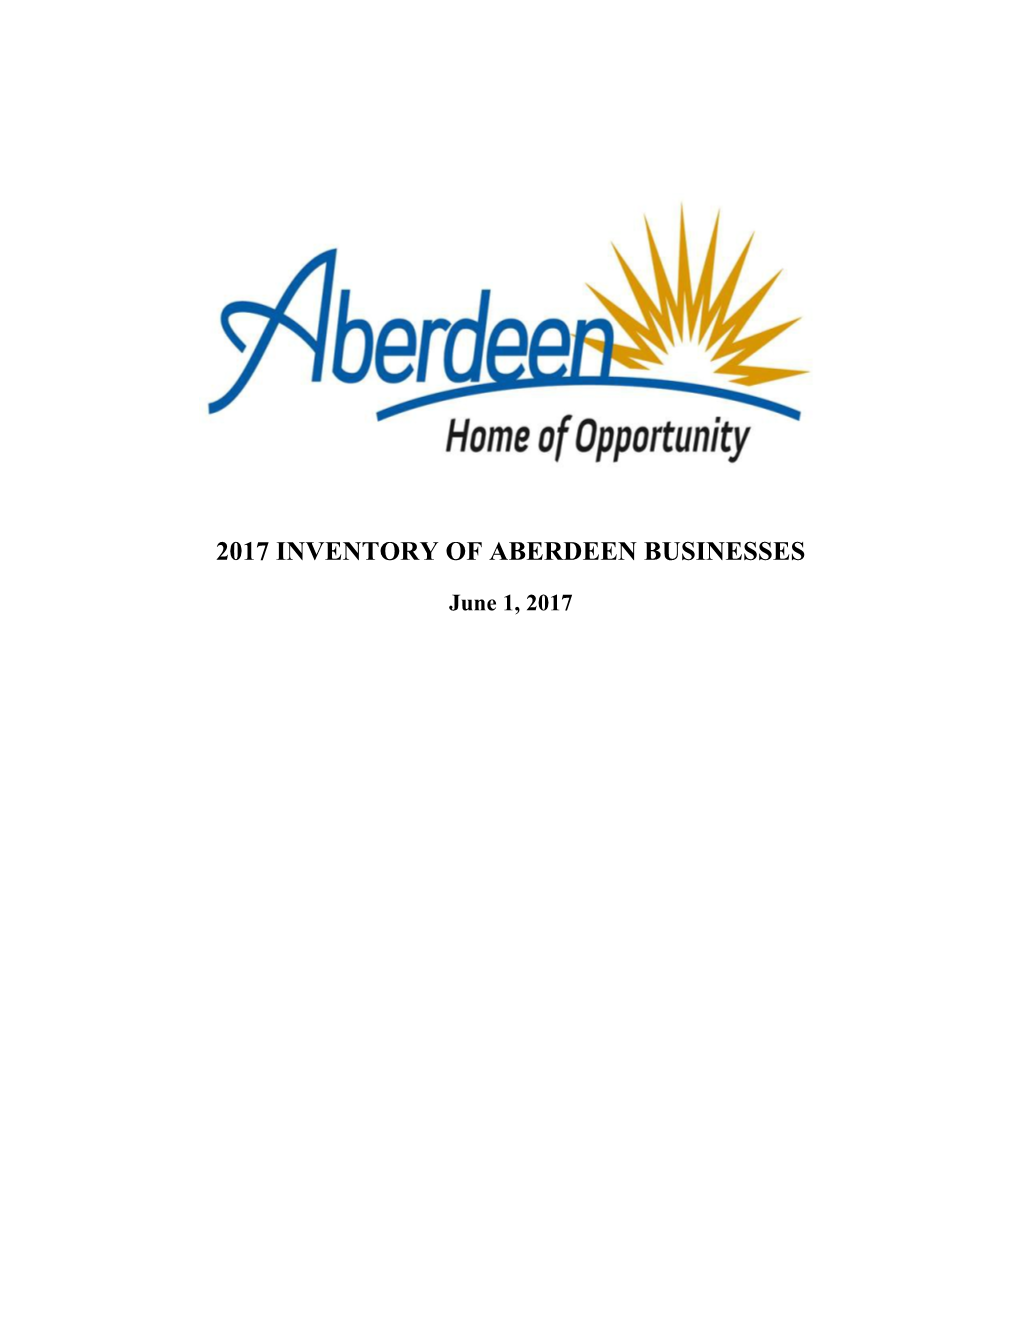 2003 Inventory of Aberdeen Businesses